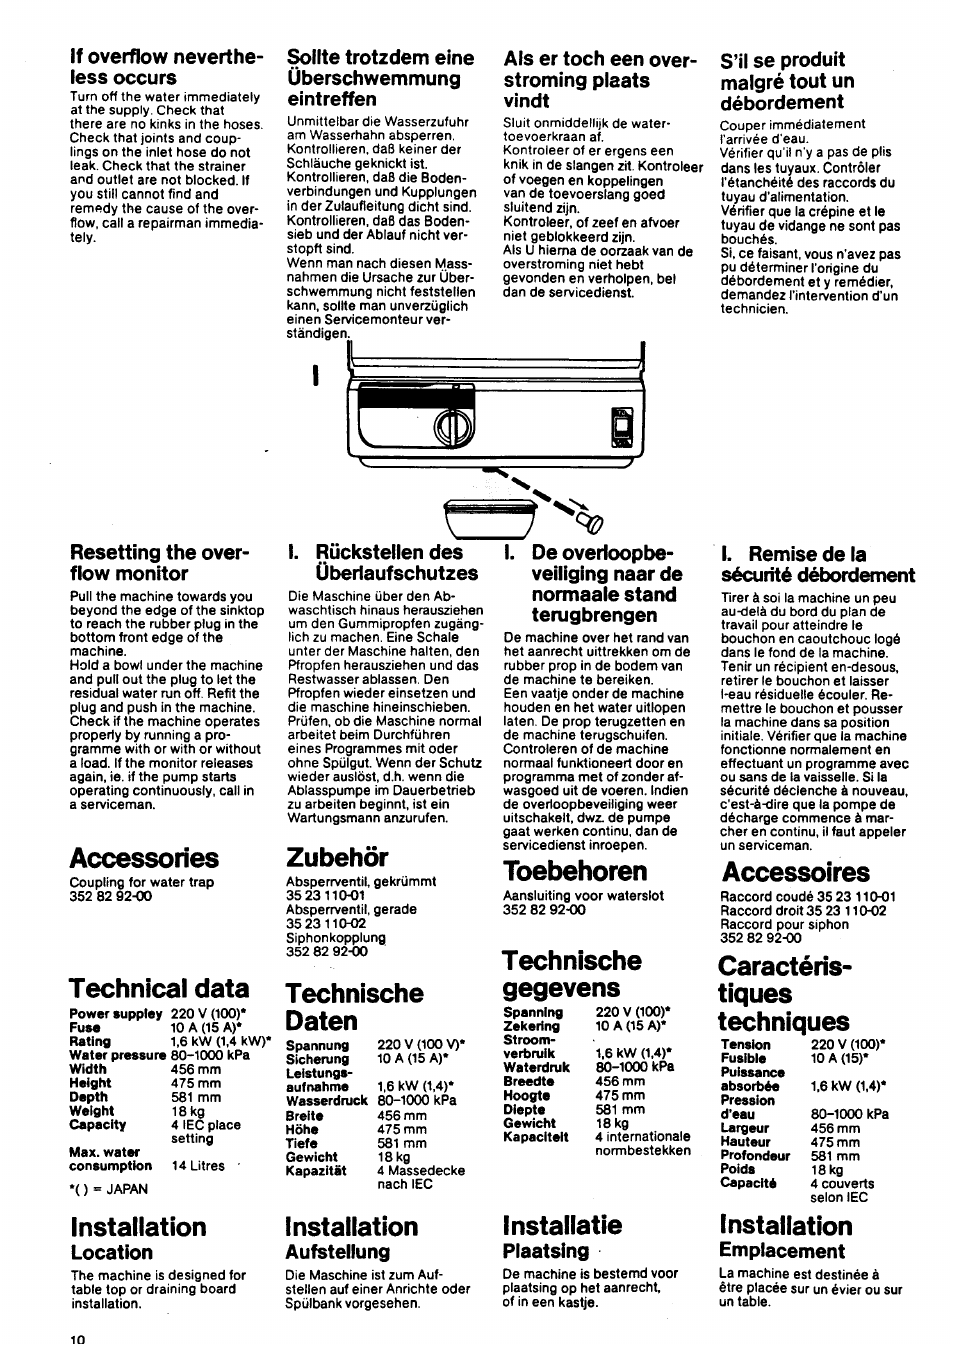 Accessories, Technical data, Installation | Electrolux BD 46 User Manual |  Page 10 / 12 | Original mode